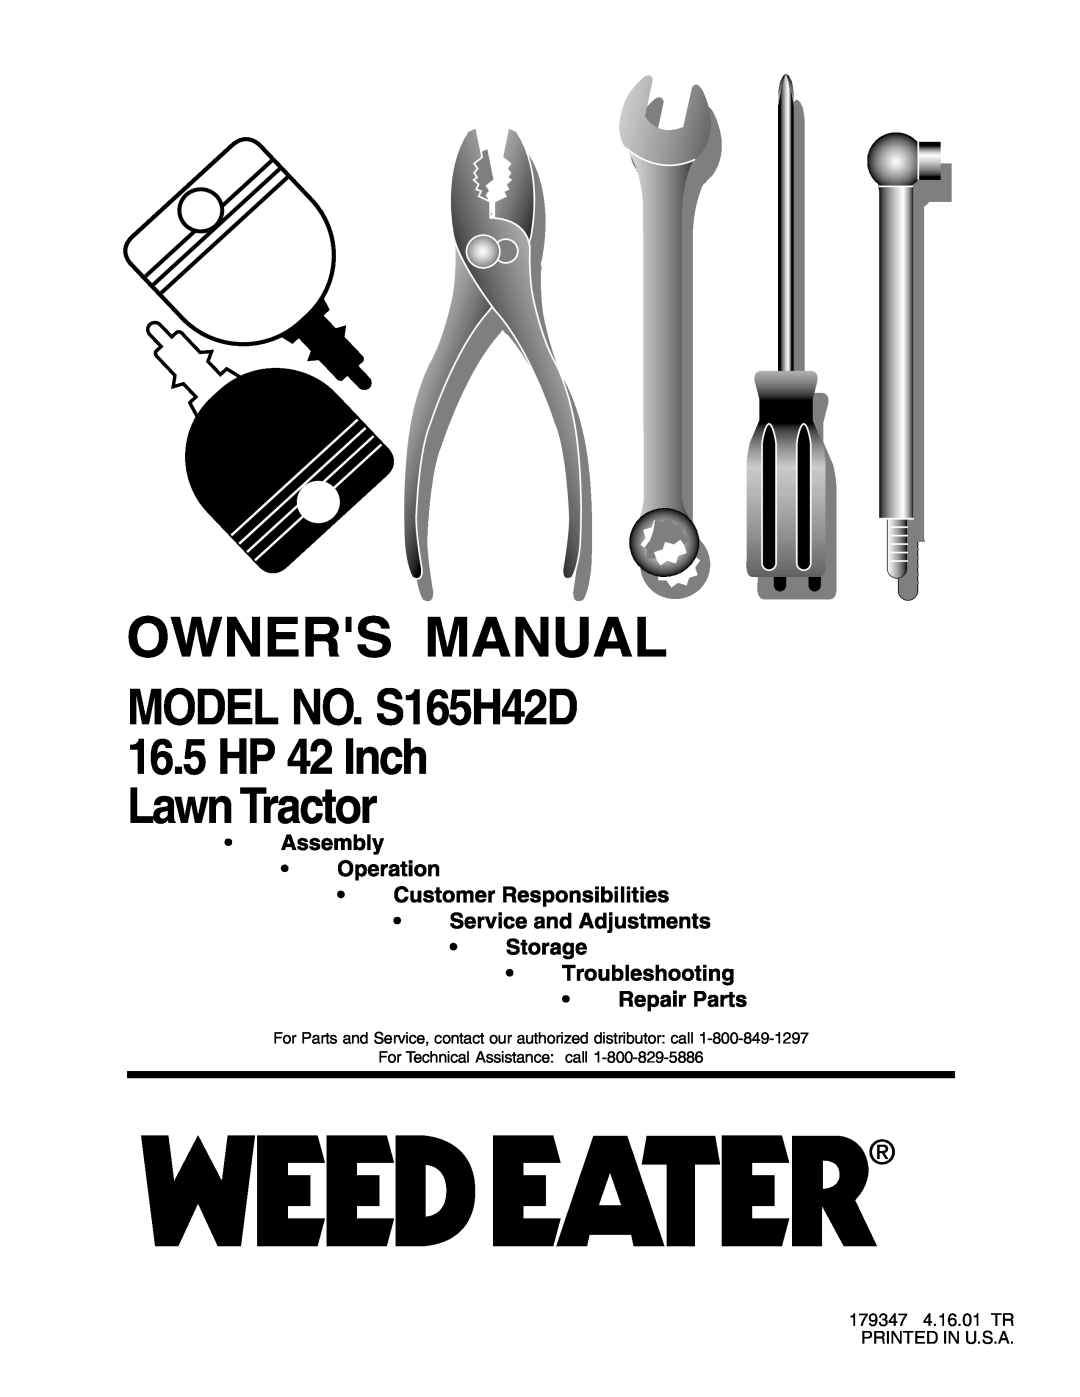 Weed Eater owner manual MODEL NO. S165H42D 16.5 HP 42 Inch Lawn Tractor 